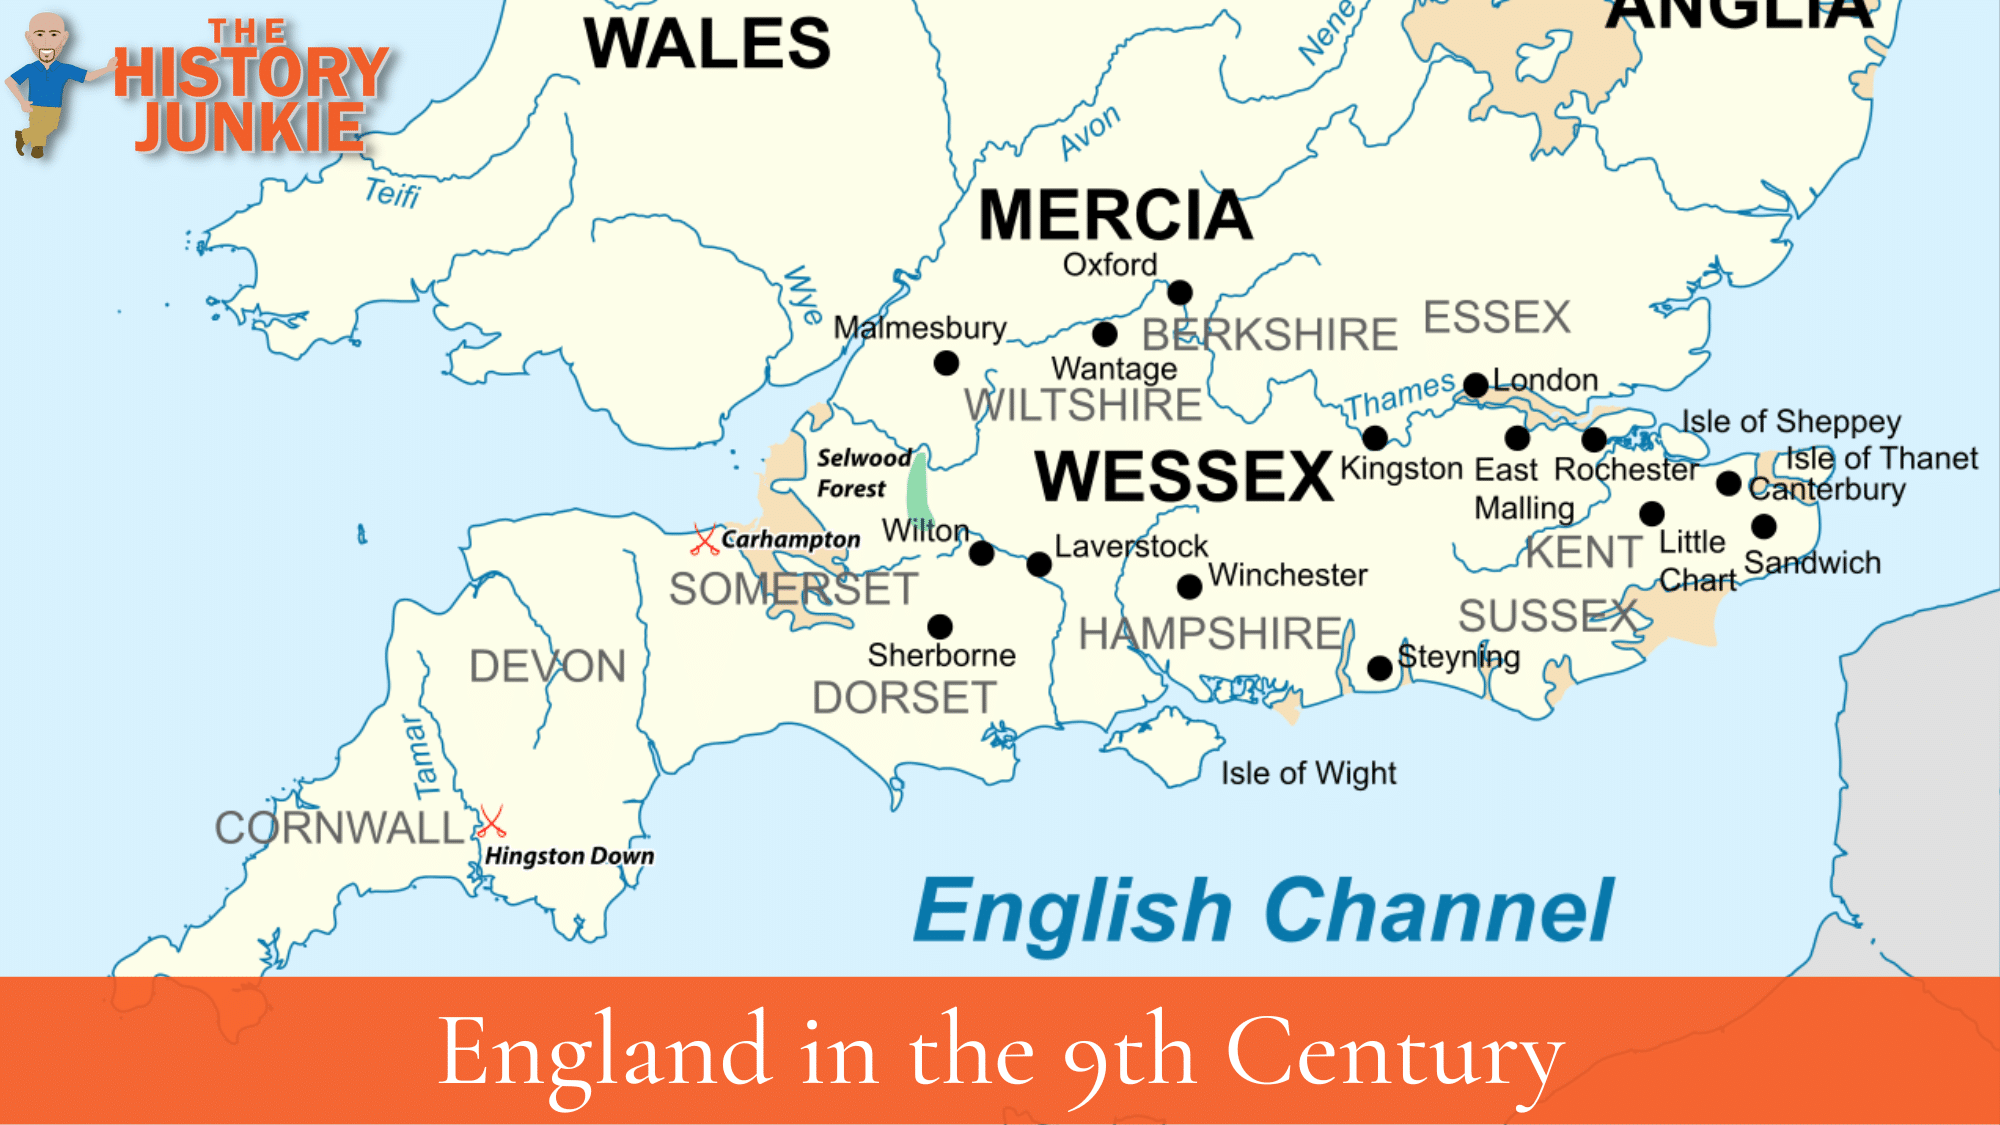 England in the 9th Century